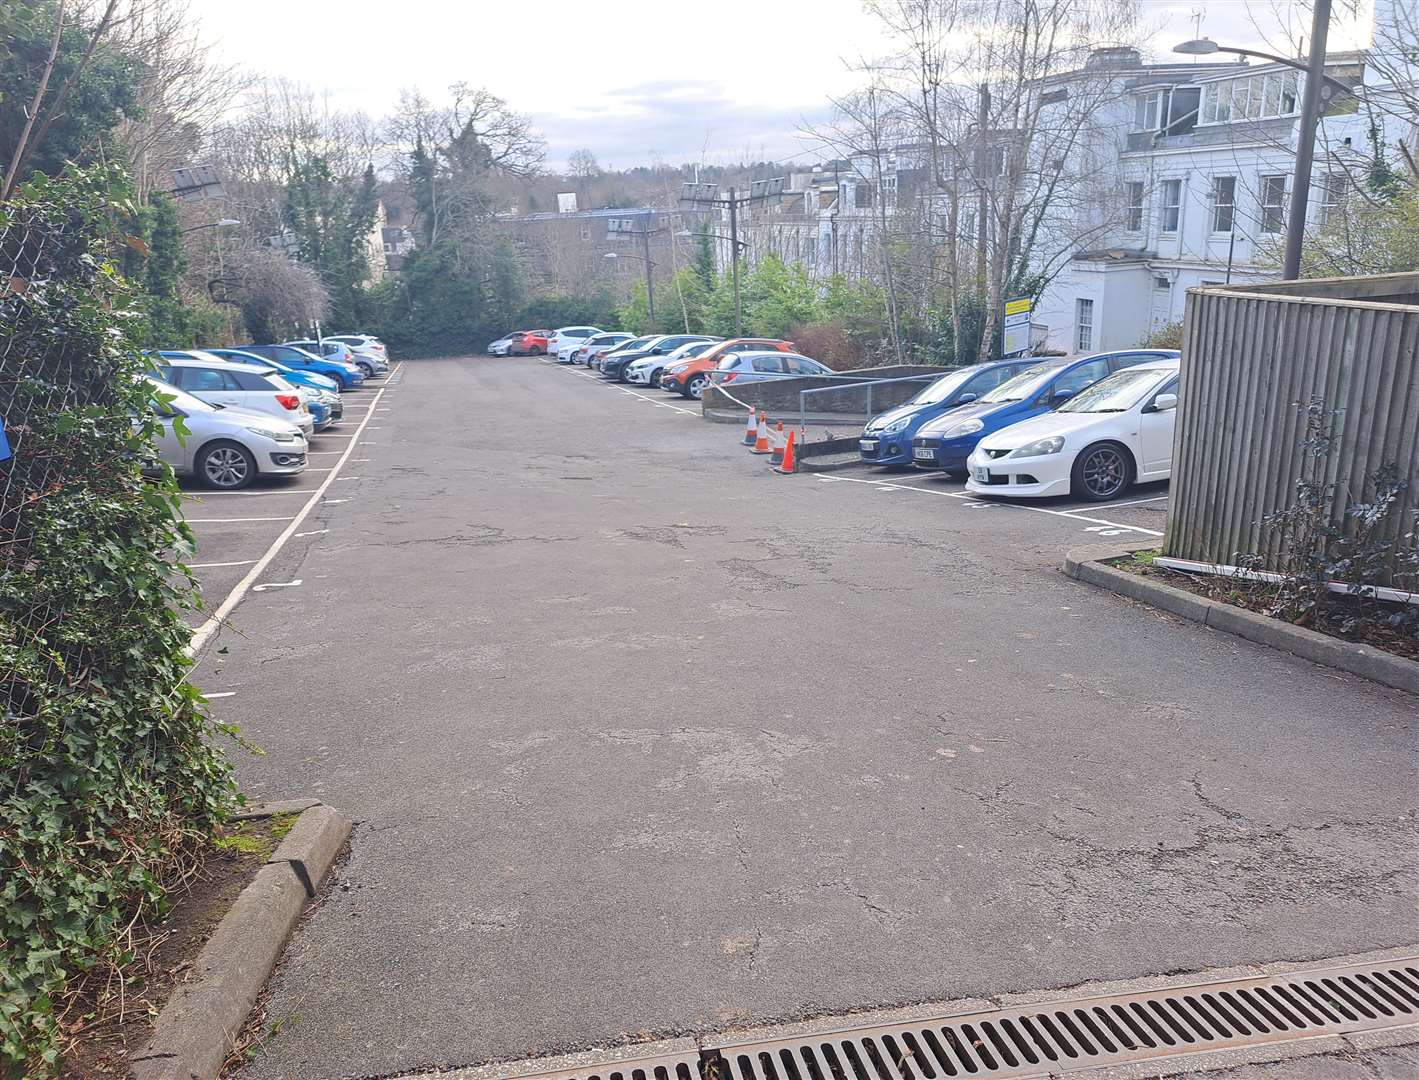 The car park in Mount Pleasant Avenue is up for sale